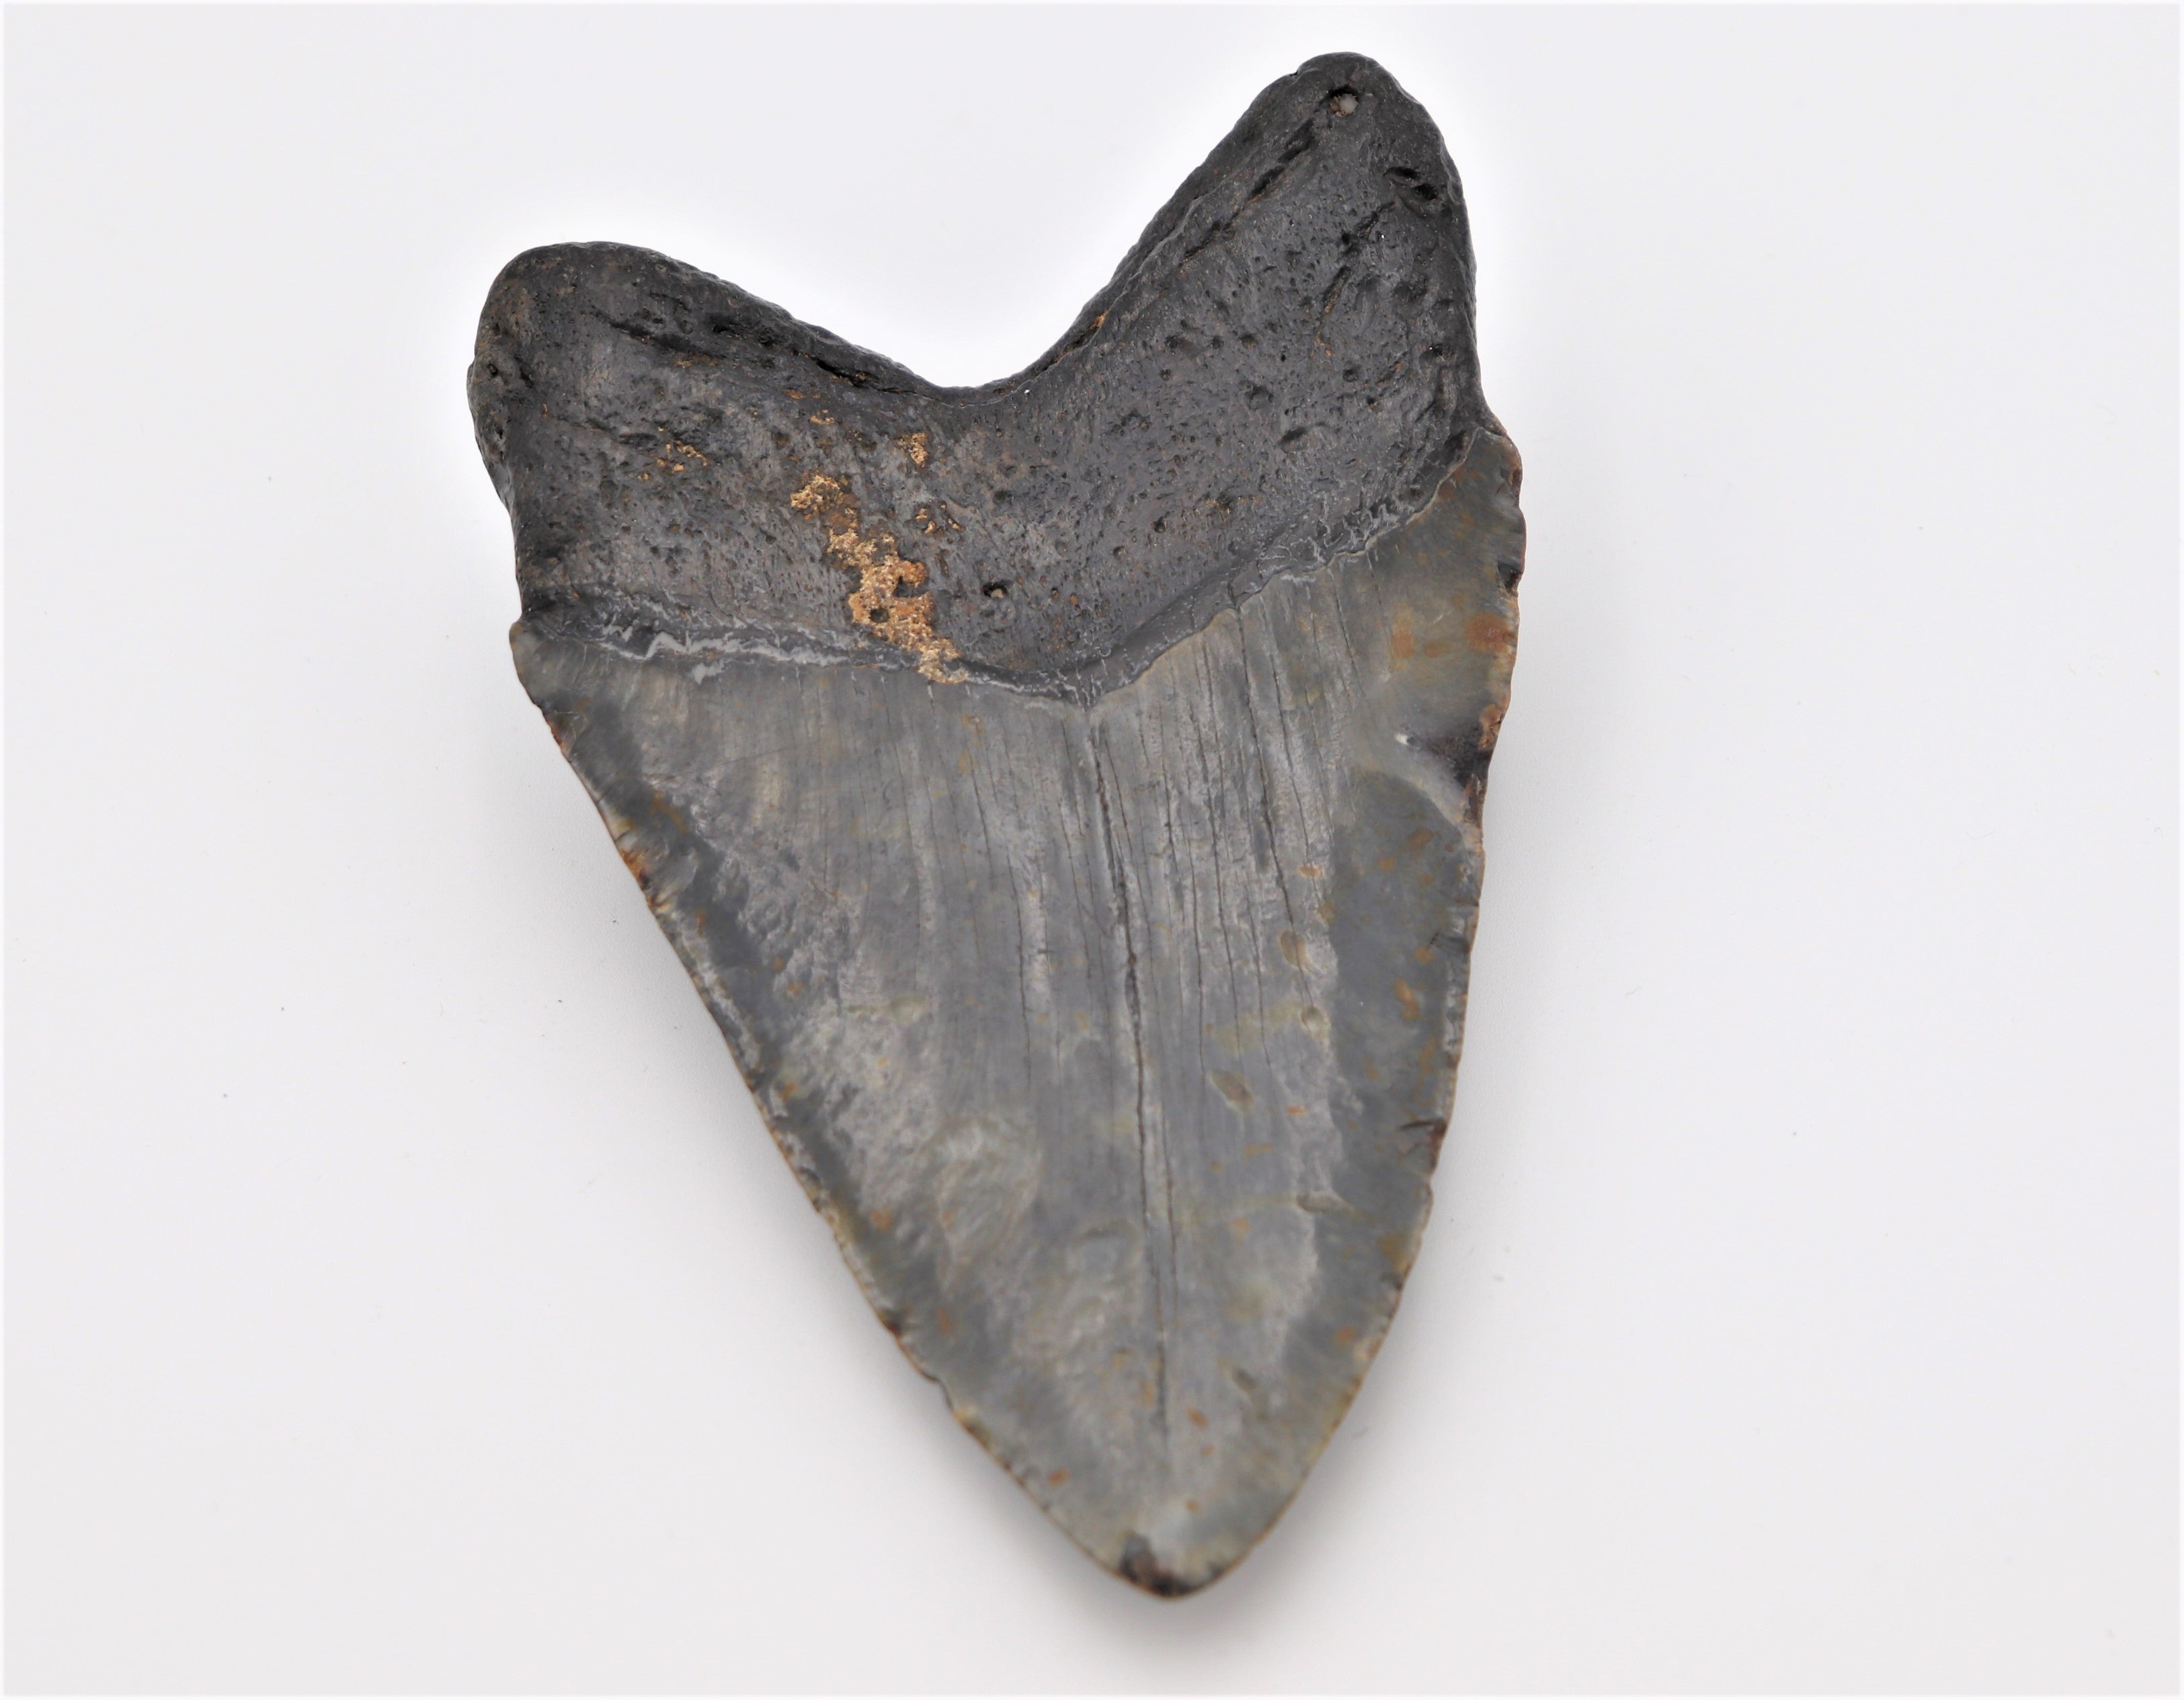 Authentic Megalodon Shark Tooth Fossil